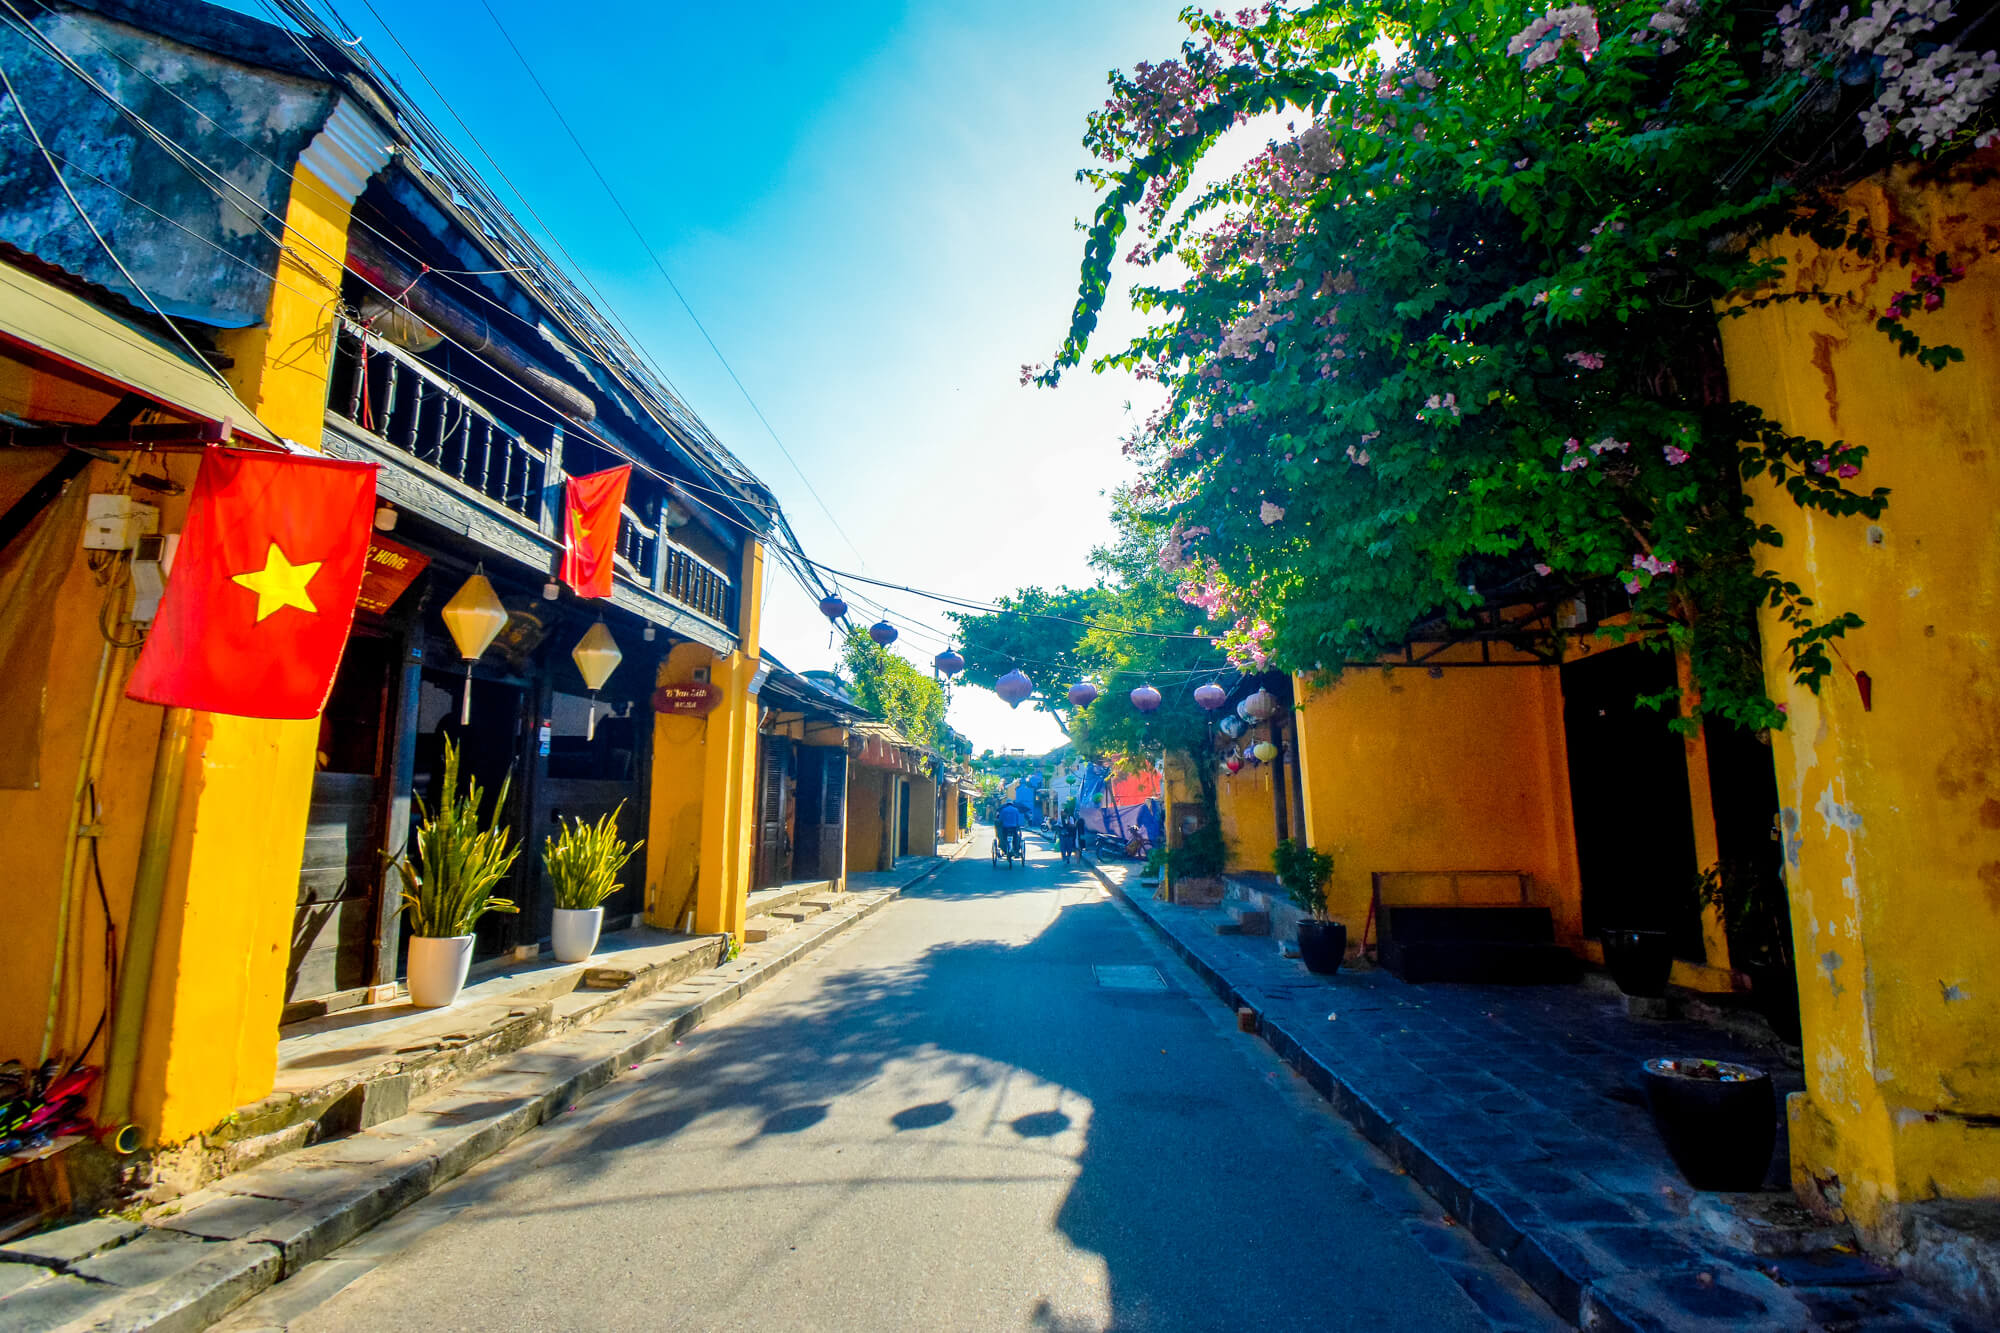 Hoi An Old Town is a World Heritage Site